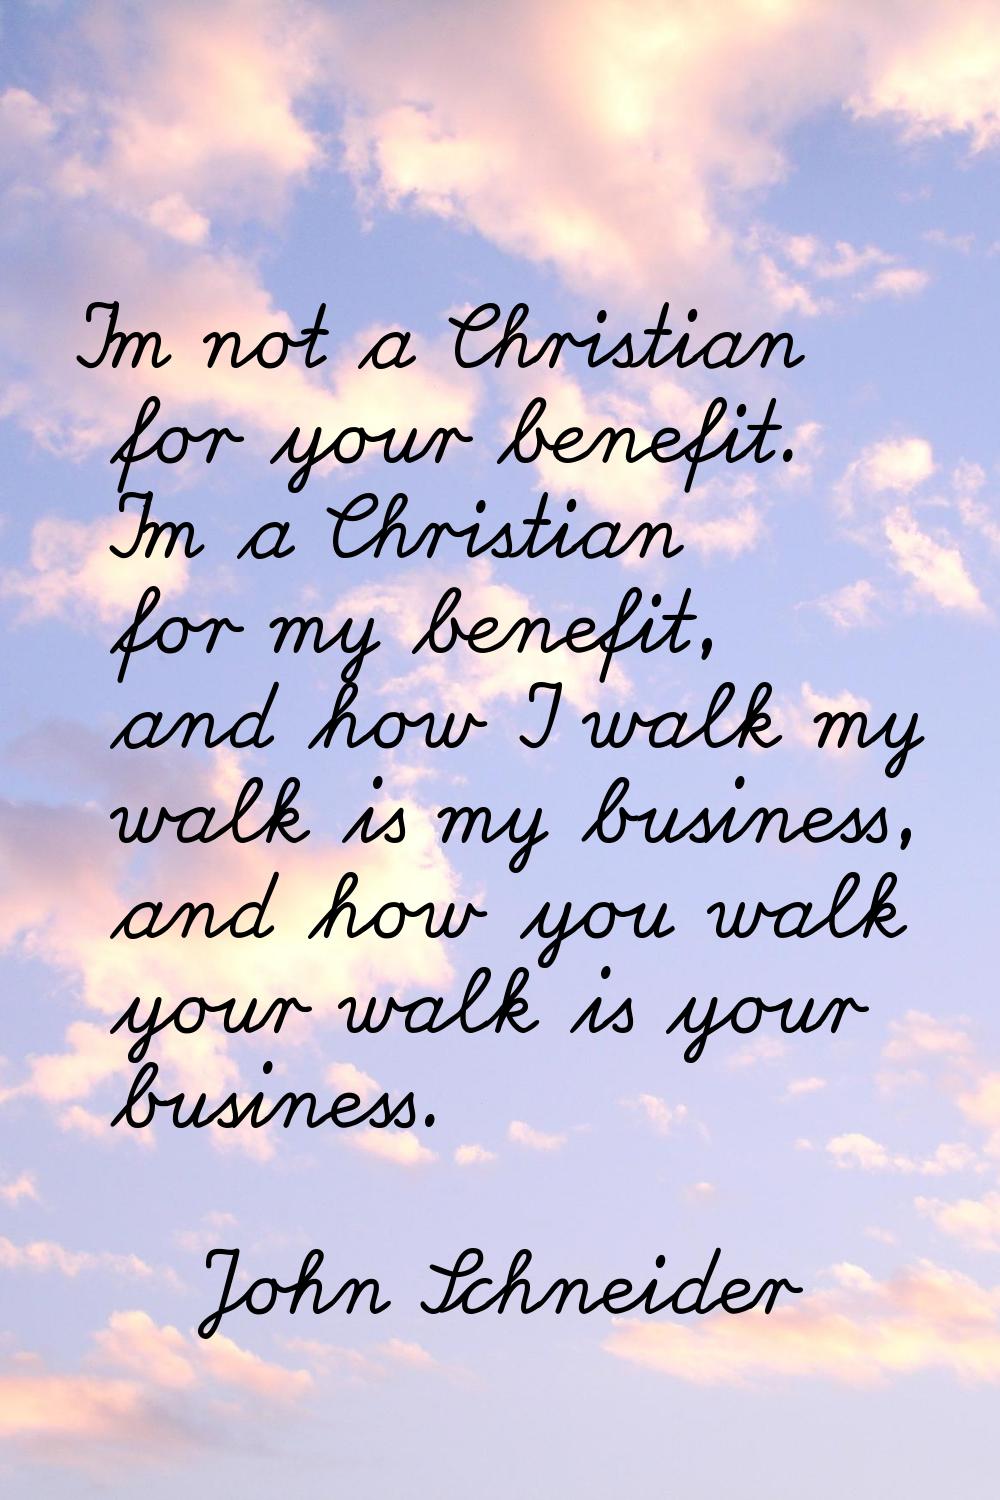 I'm not a Christian for your benefit. I'm a Christian for my benefit, and how I walk my walk is my 